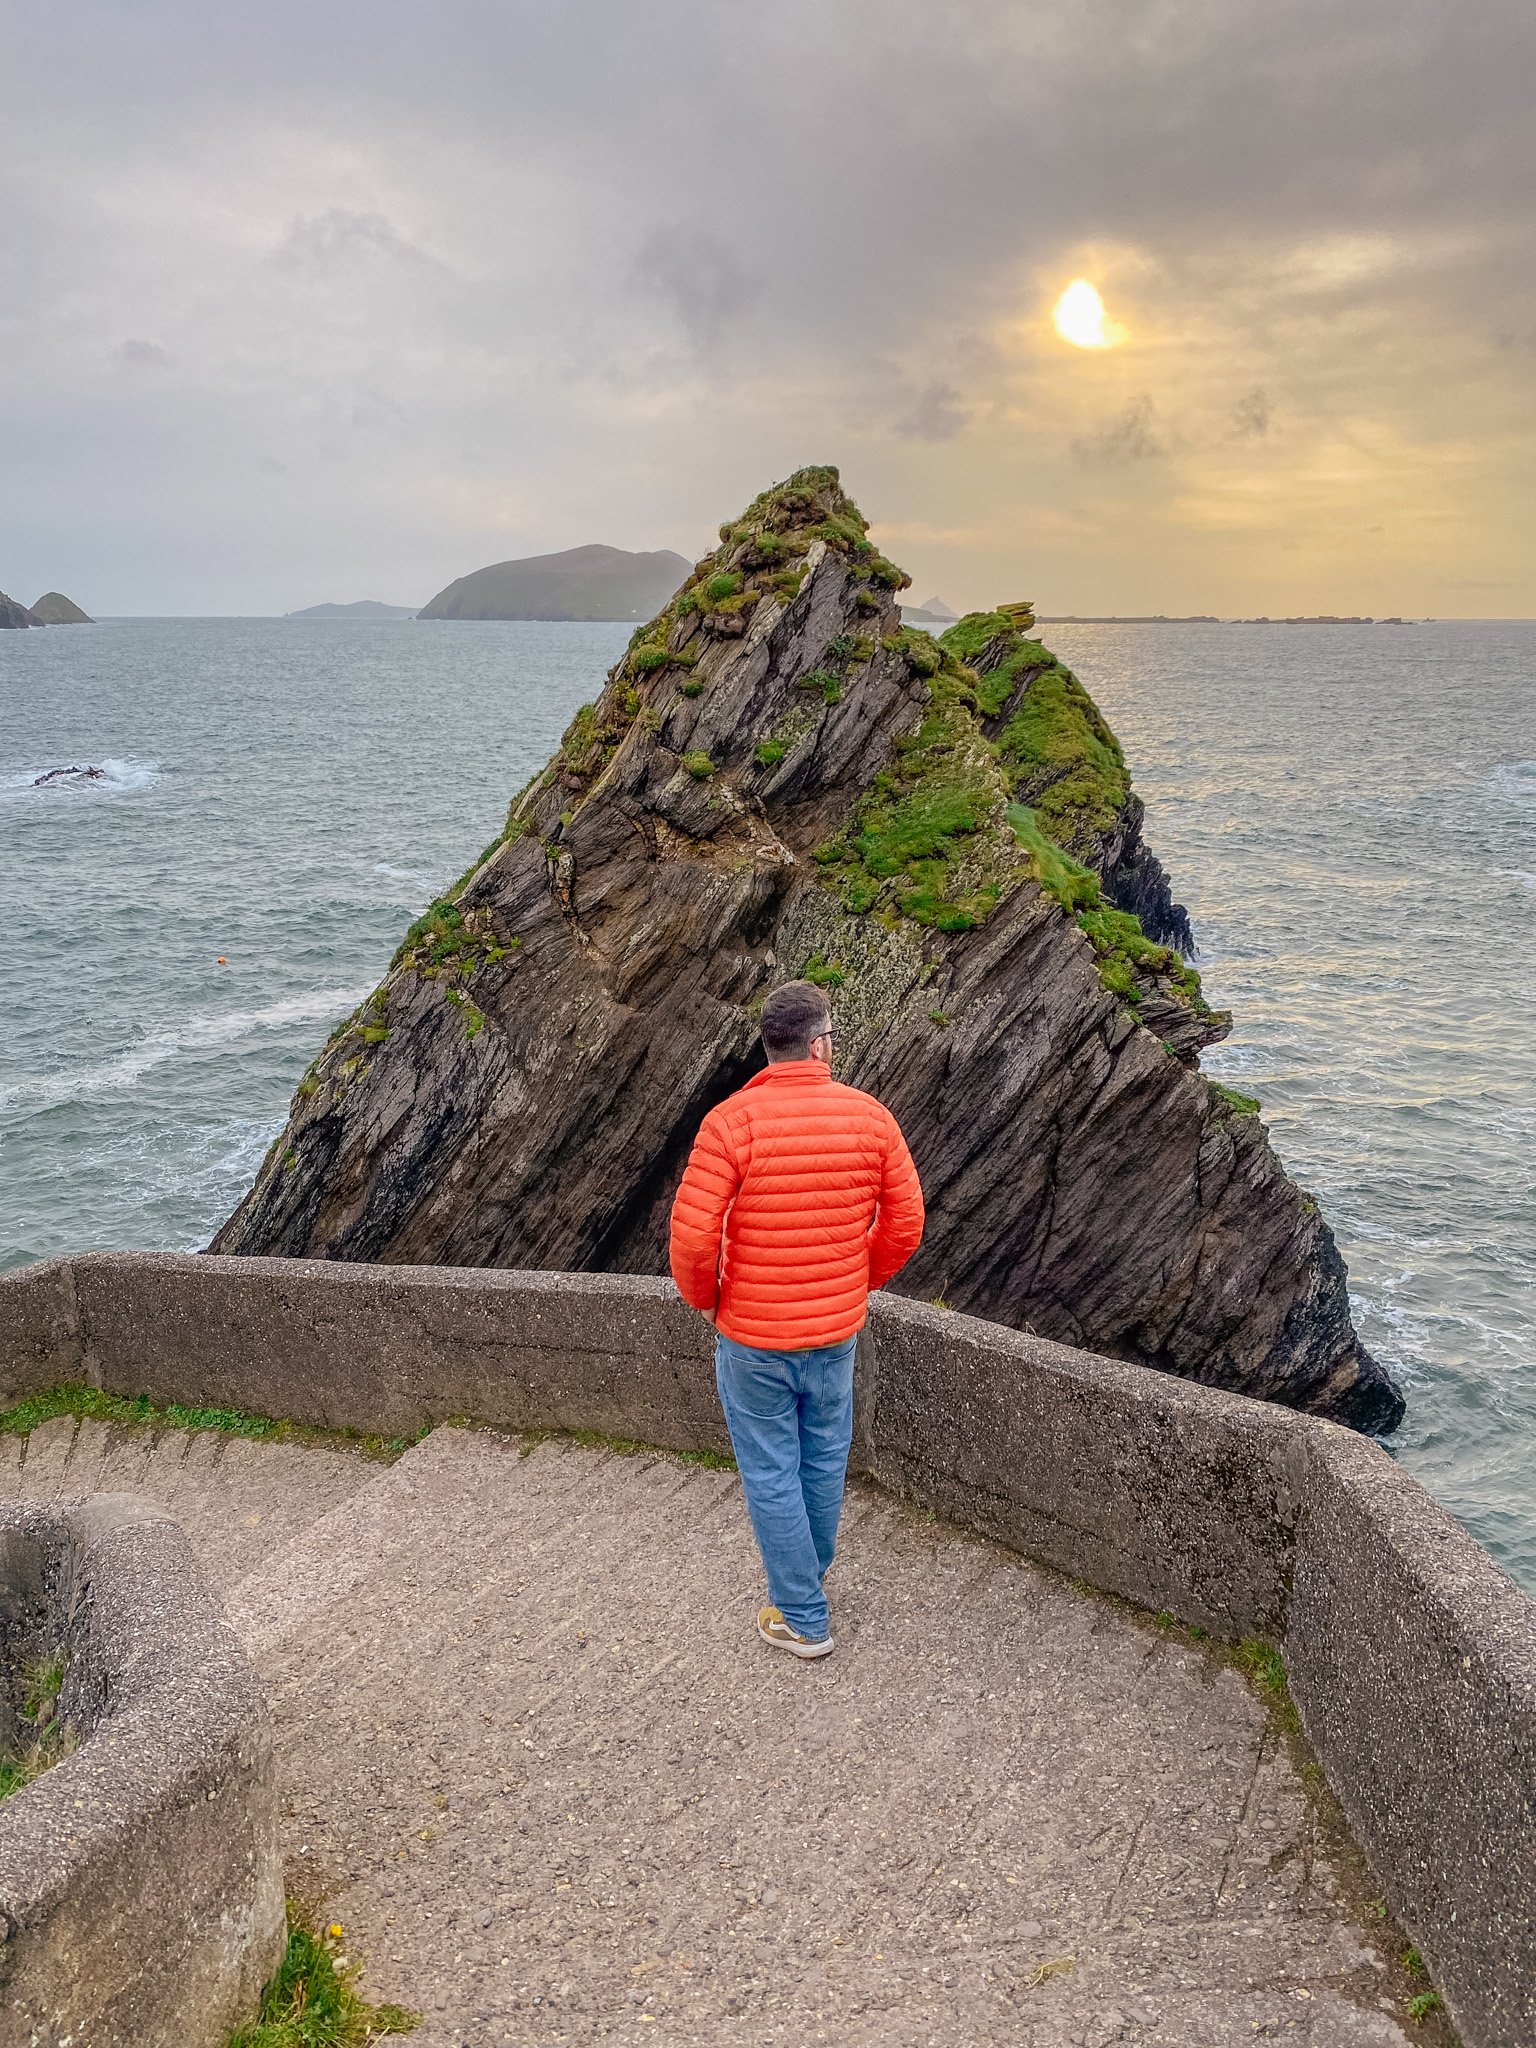 25 photos to inspire you to add an irish road trip to your bucket list